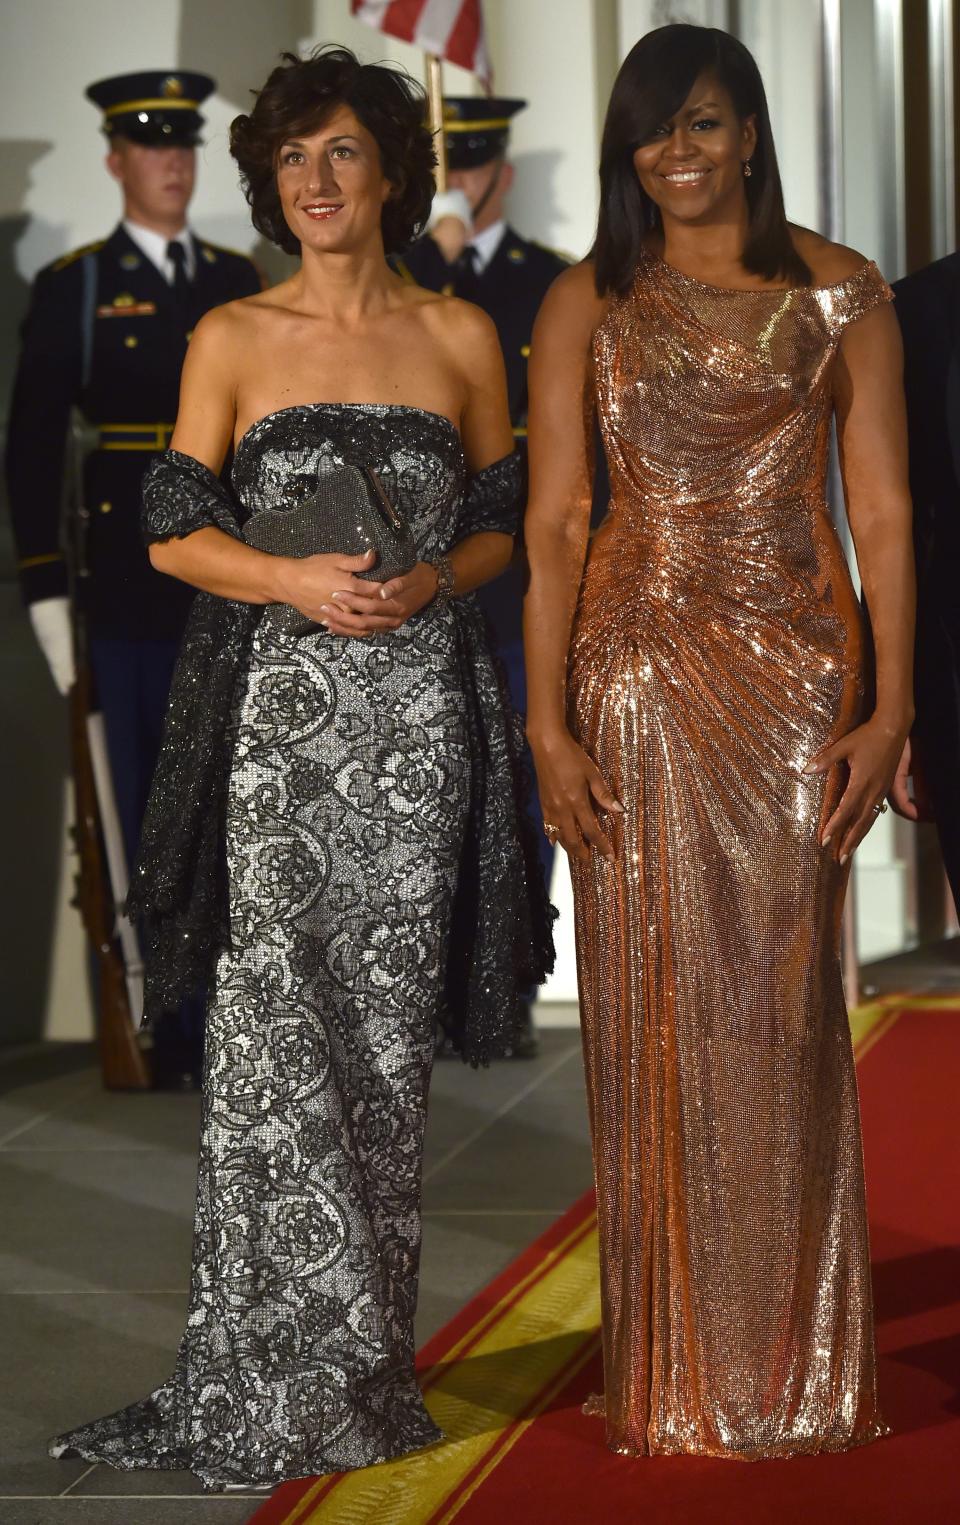 <a href="http://www.huffingtonpost.com/entry/michelle-obama-state-dinner_us_5806105be4b0180a36e61feb?utm_hp_ref=michelle-obama-style">Wearing Atelier Versace</a> for a state dinner on Oct. 18.&nbsp;